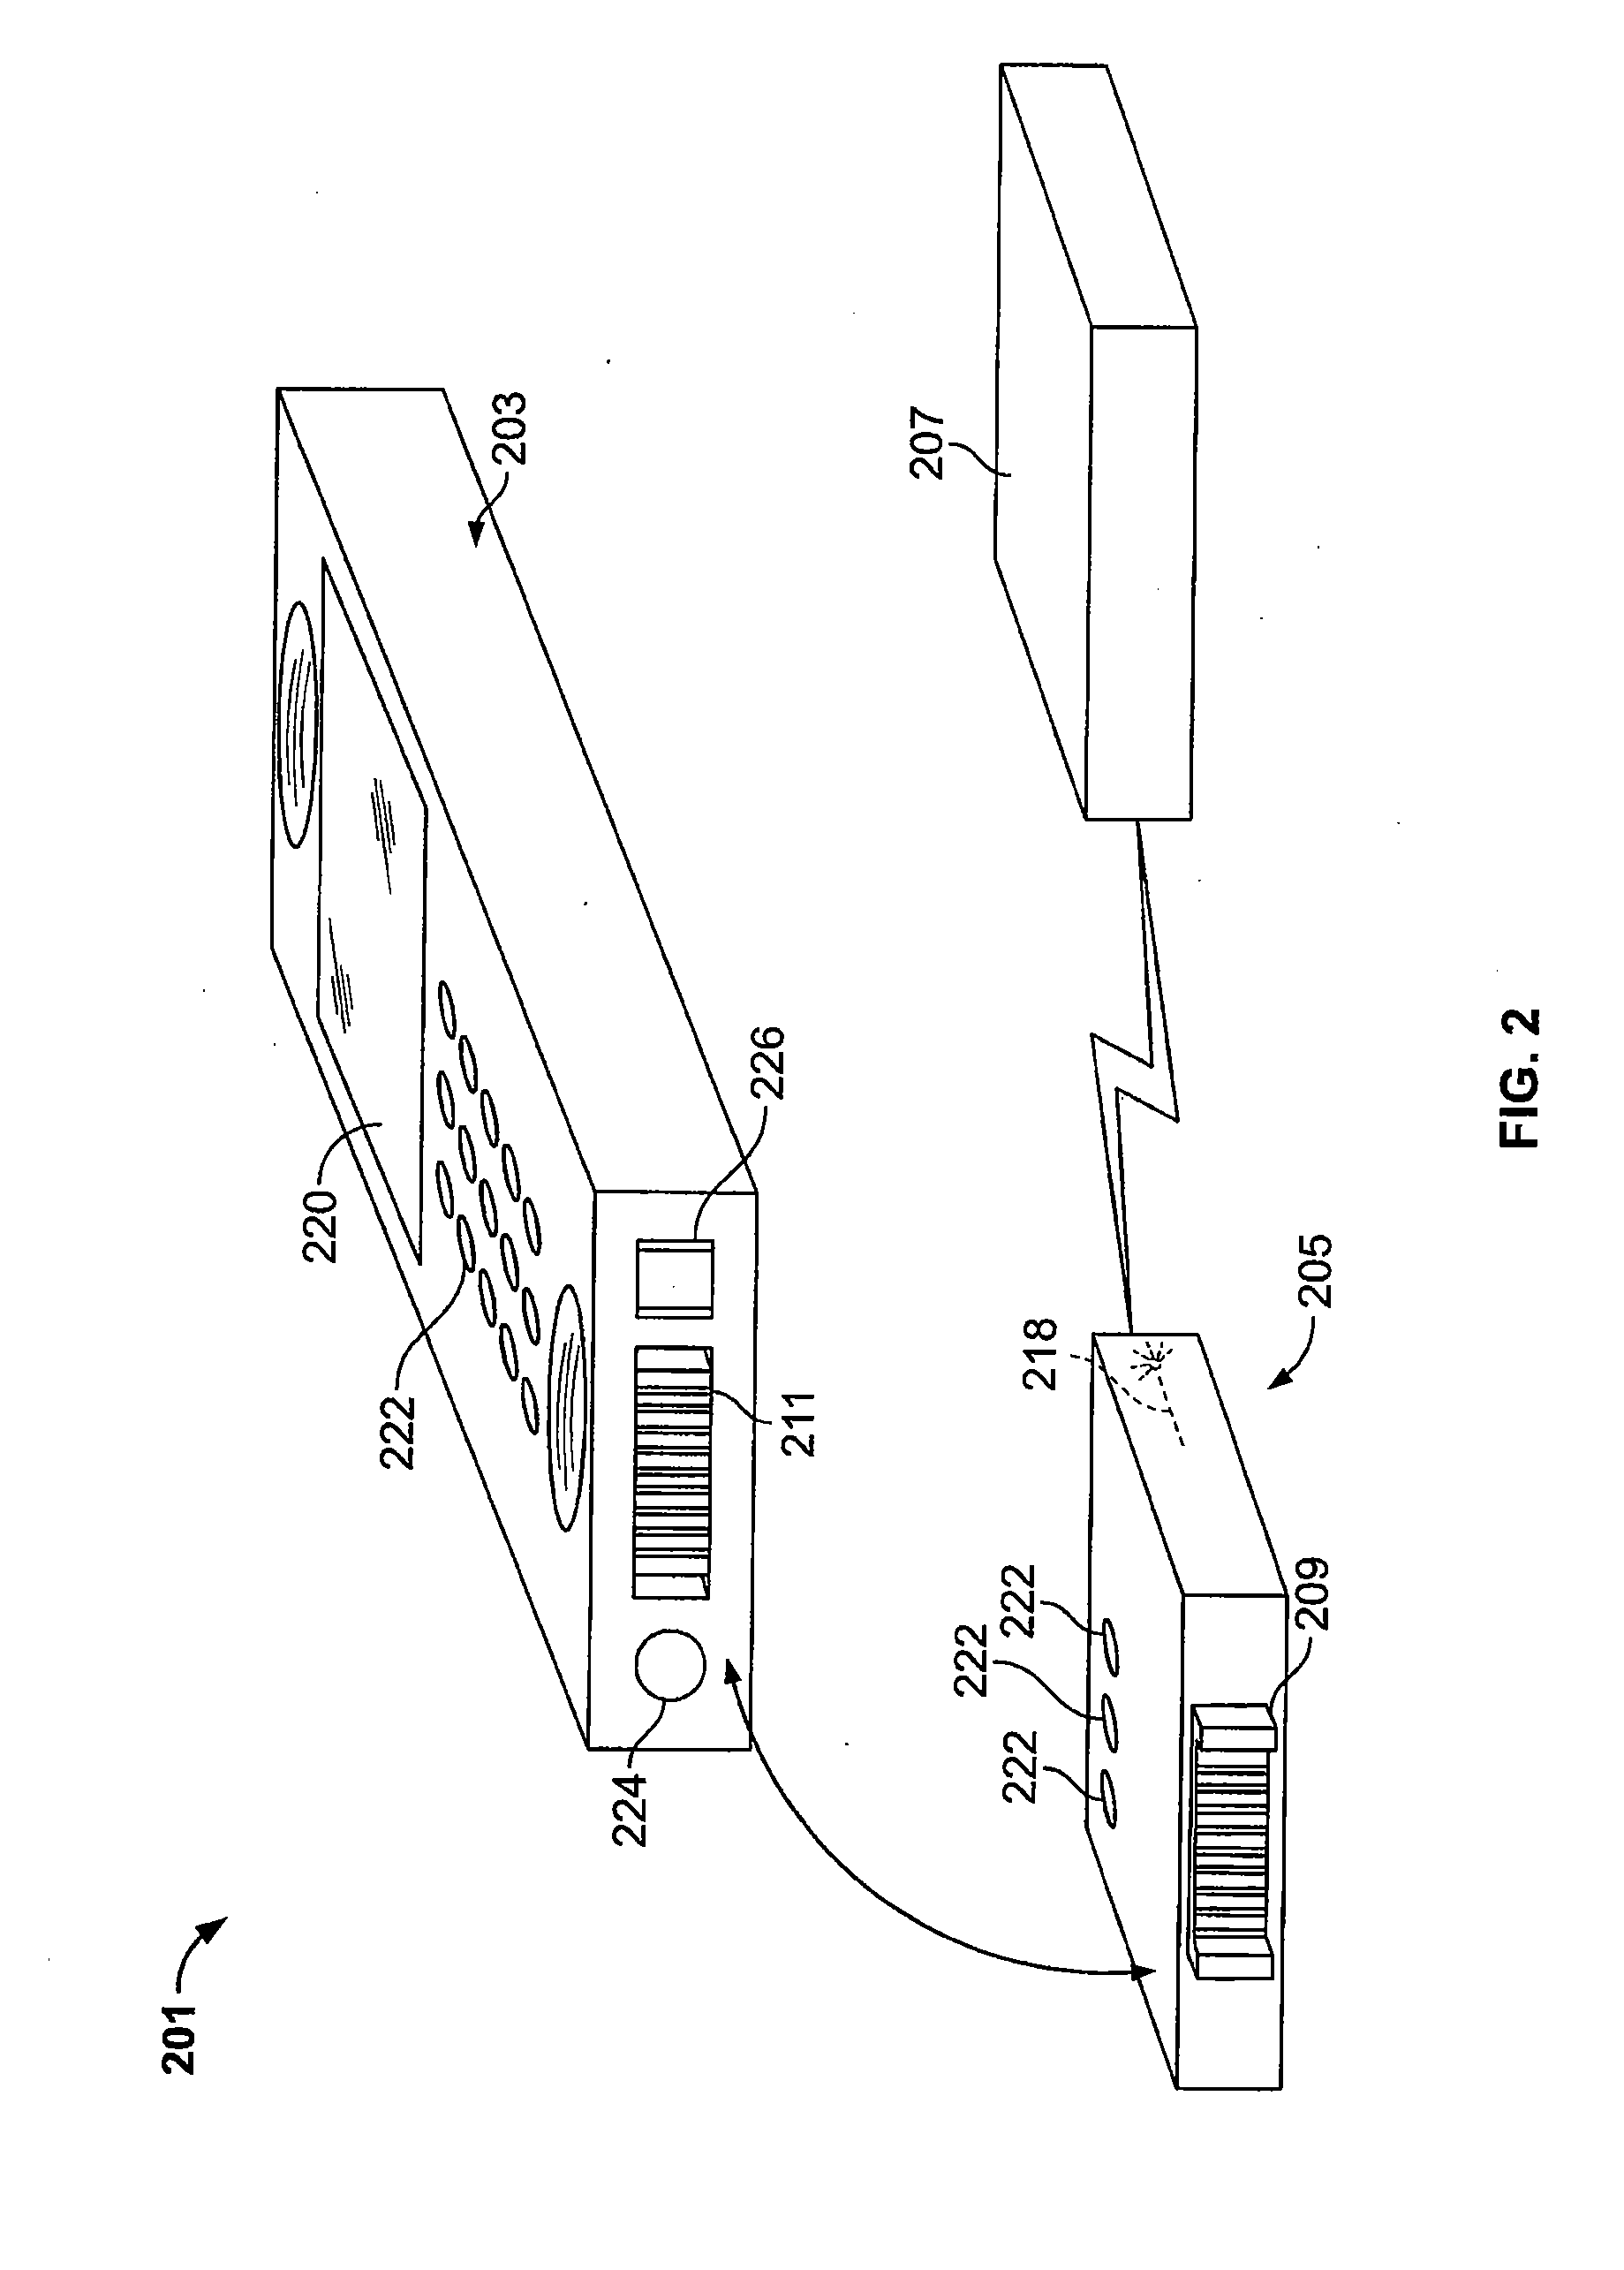 System and method for athletic performance race